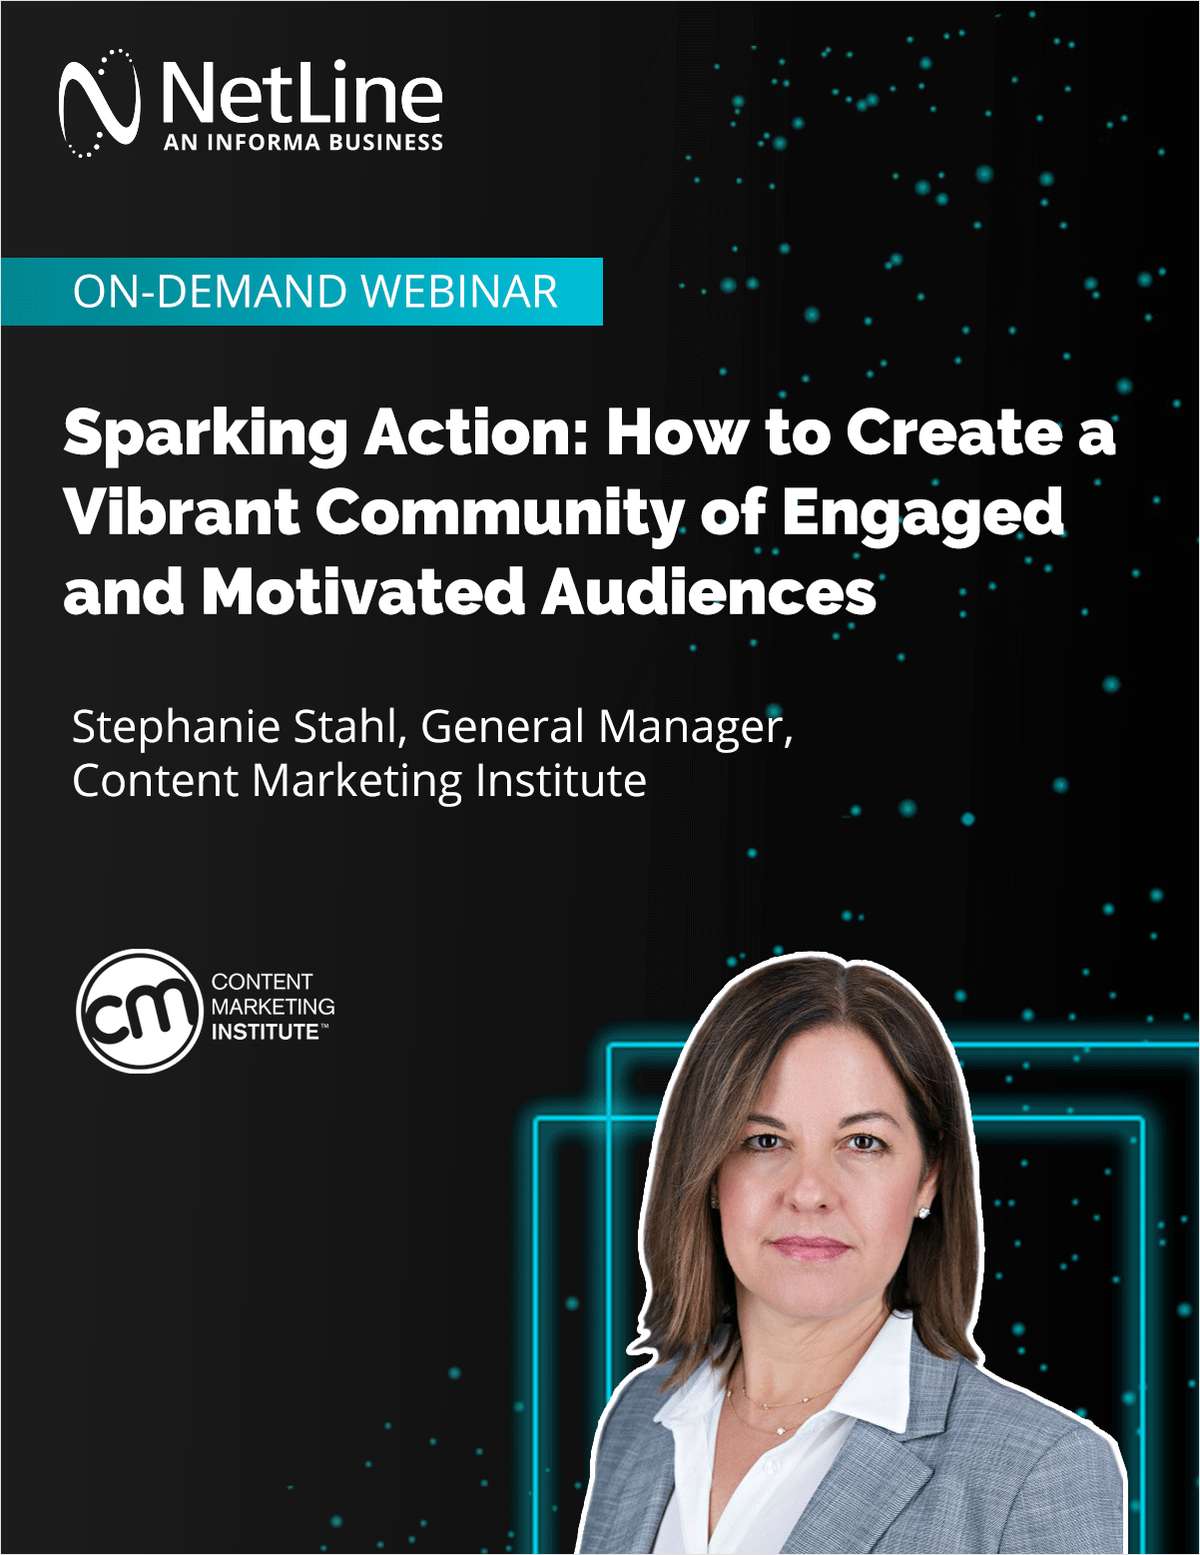 How to Create a Vibrant Community of Engaged and Motivated Audiences